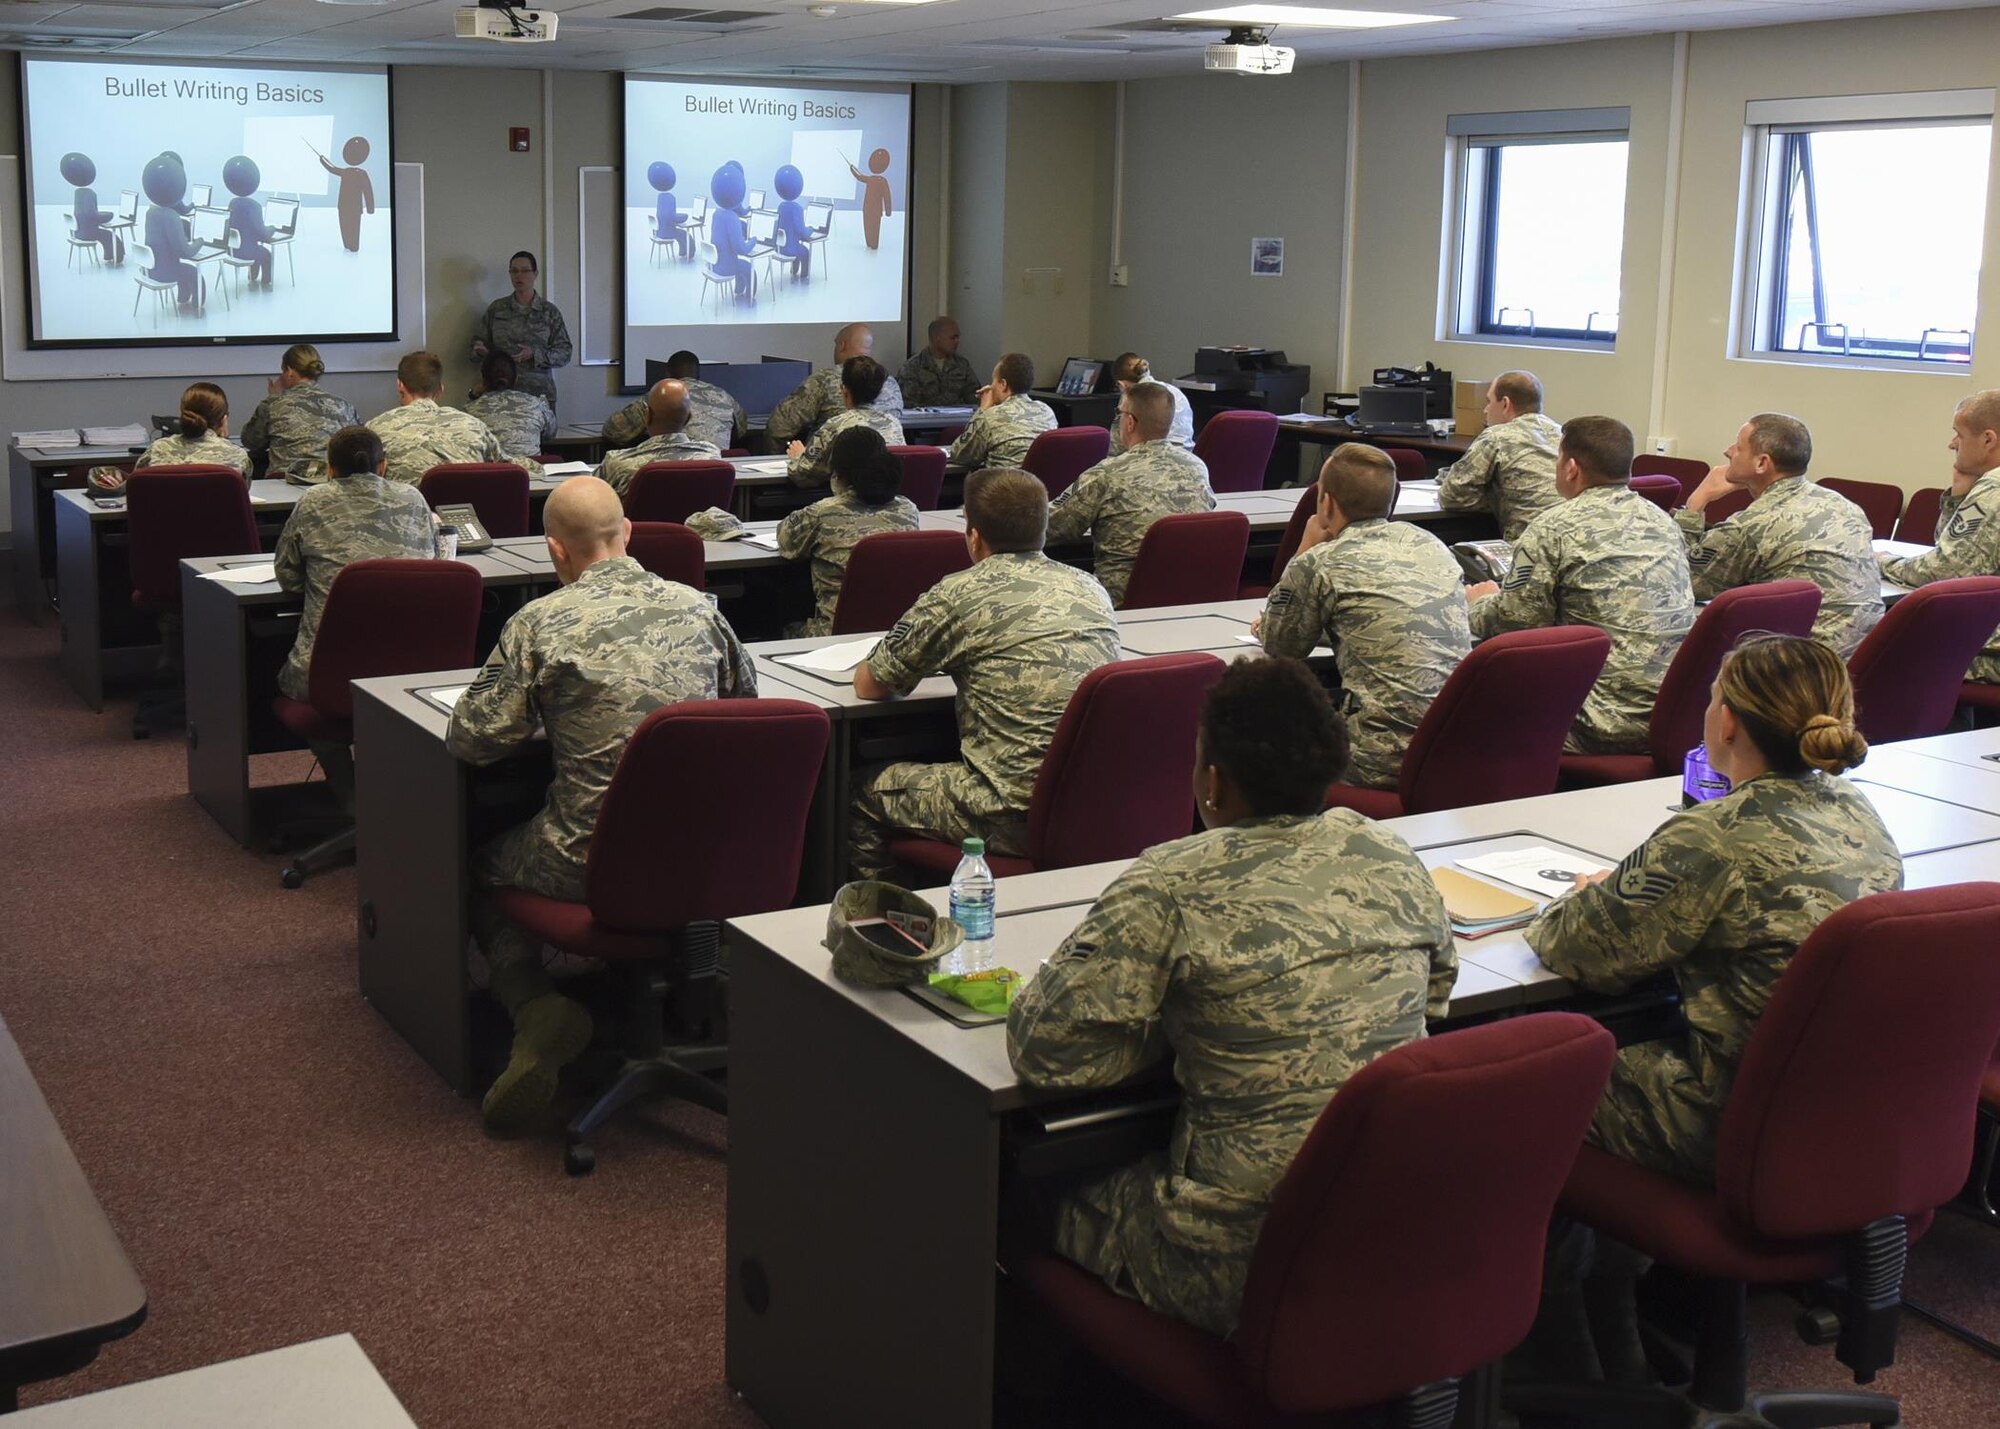 Chief Master Sgt. Paula C. Shawhan, chief of the I.G. Brown Training and Education Center, Professional Continuing Education division, teaches bullet writing to Airmen at the Maryland Air National Guard's 175th Wing, June 20, 2017, in Middle River, Md. The two-hour class teaches the fundamental dynamics on how to write an effective bullet statement for enlisted performance reports and officer performance
reports. (U.S. Air National Guard photo by Senior Airman Enjoli Saunders)